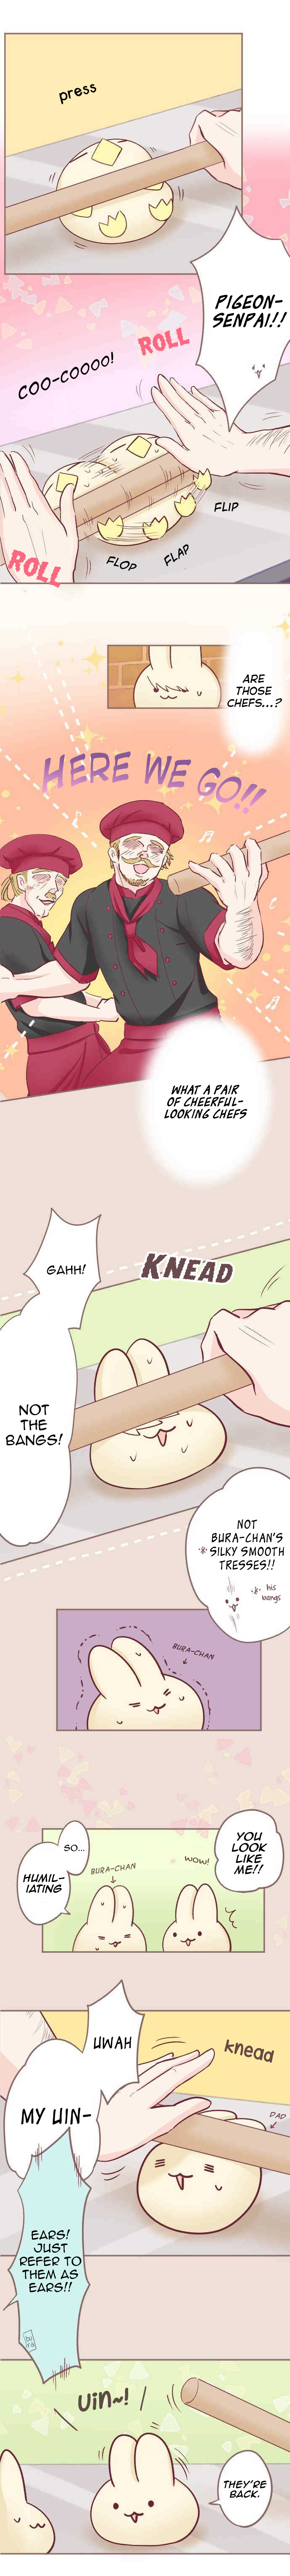 Let Me Eat You Ch. 35 Usa Usa What Kind of Dough? (2)